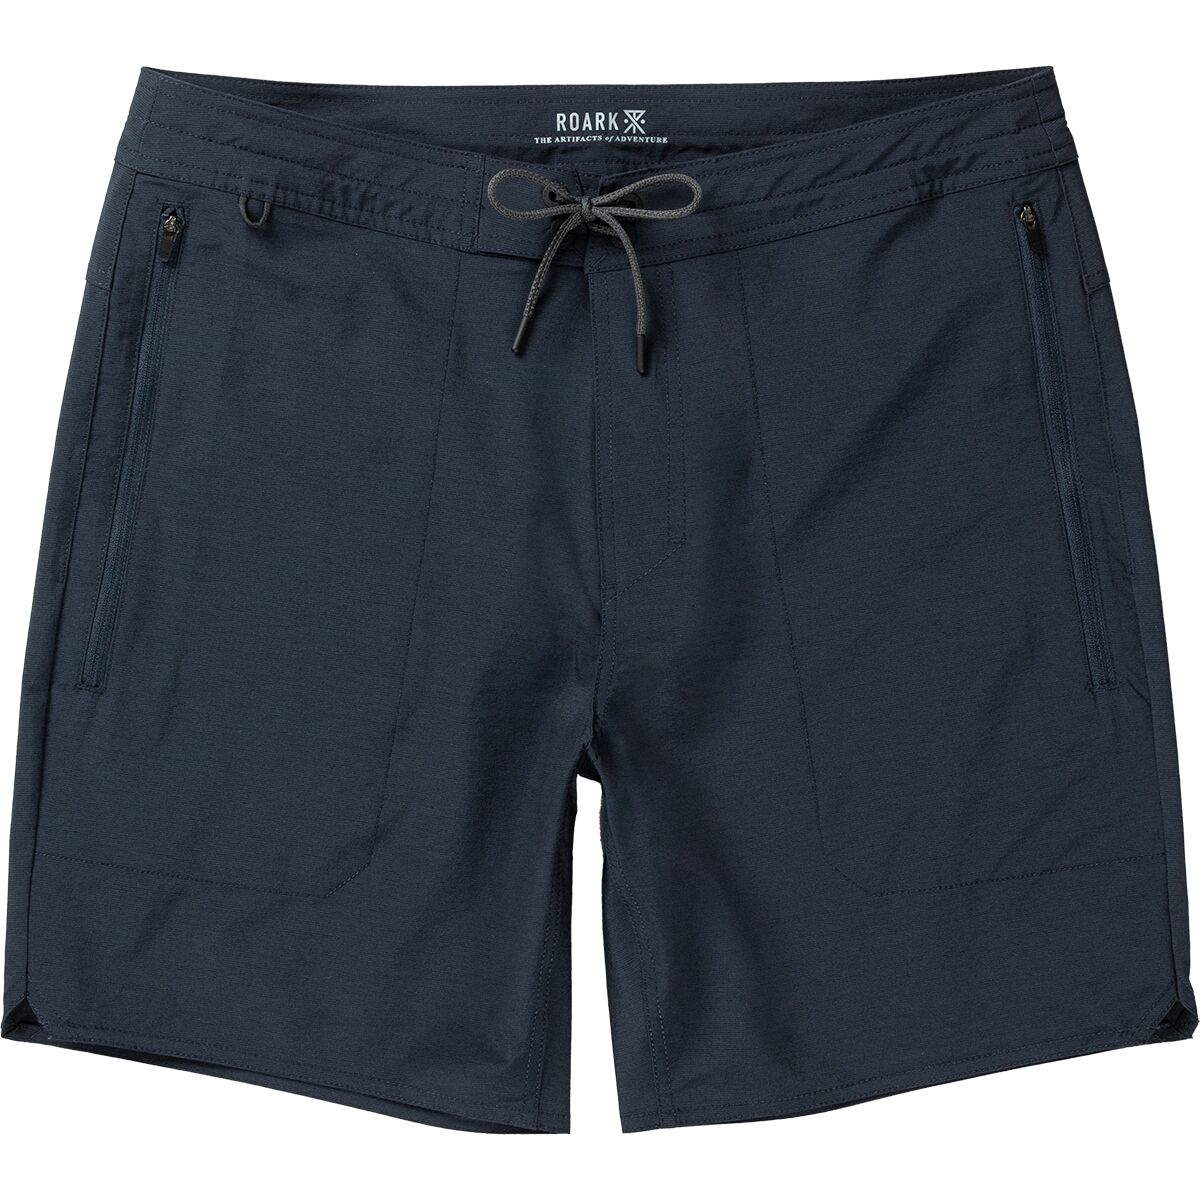 Roark Layover Trail 2.0 Hybrid Shorts Black Mens Size 34 RS297 for sale ...